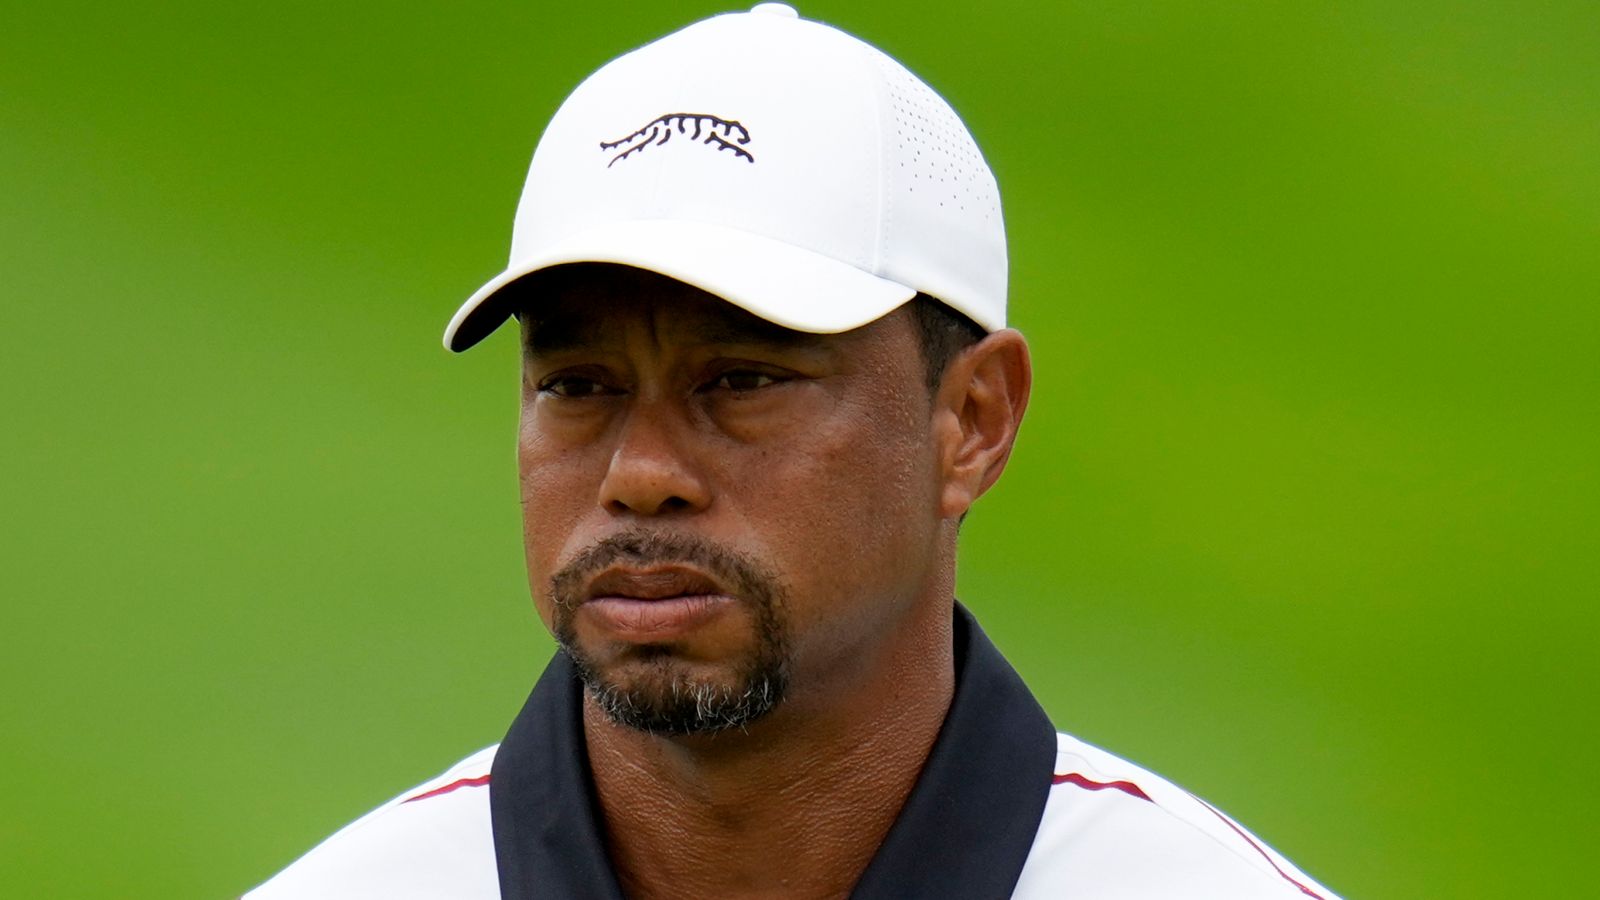 PGA Championship: Tiger Woods rues mistakes and lack of tournament prep after major missed cut at Valhalla | Golf News